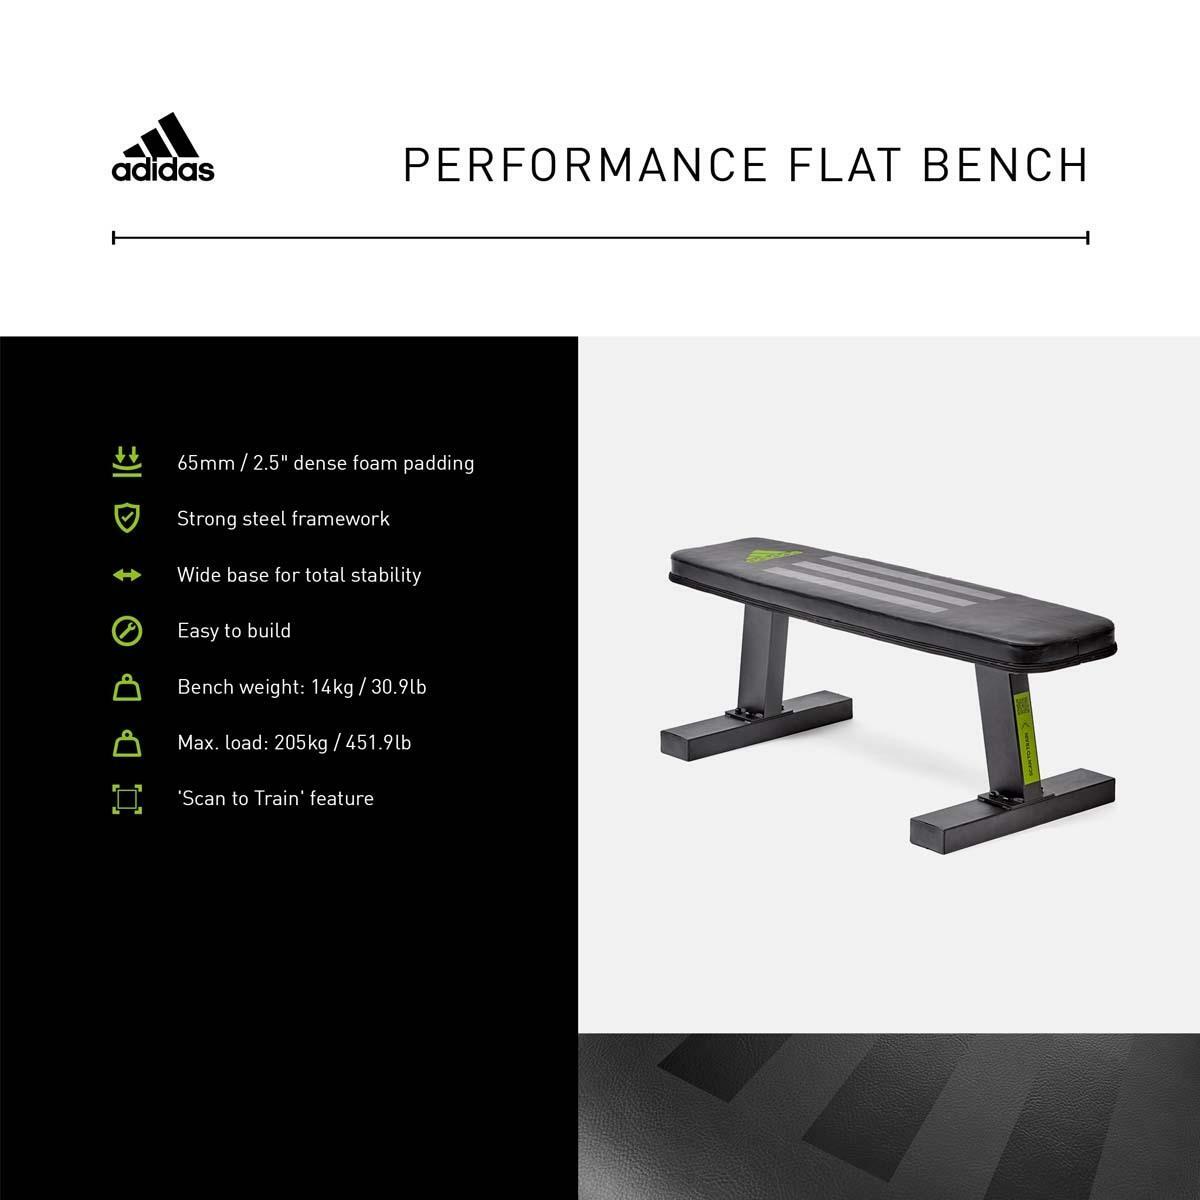 Esencialmente pureza imitar Adidas Performance Flat Bench from Made4Fighters